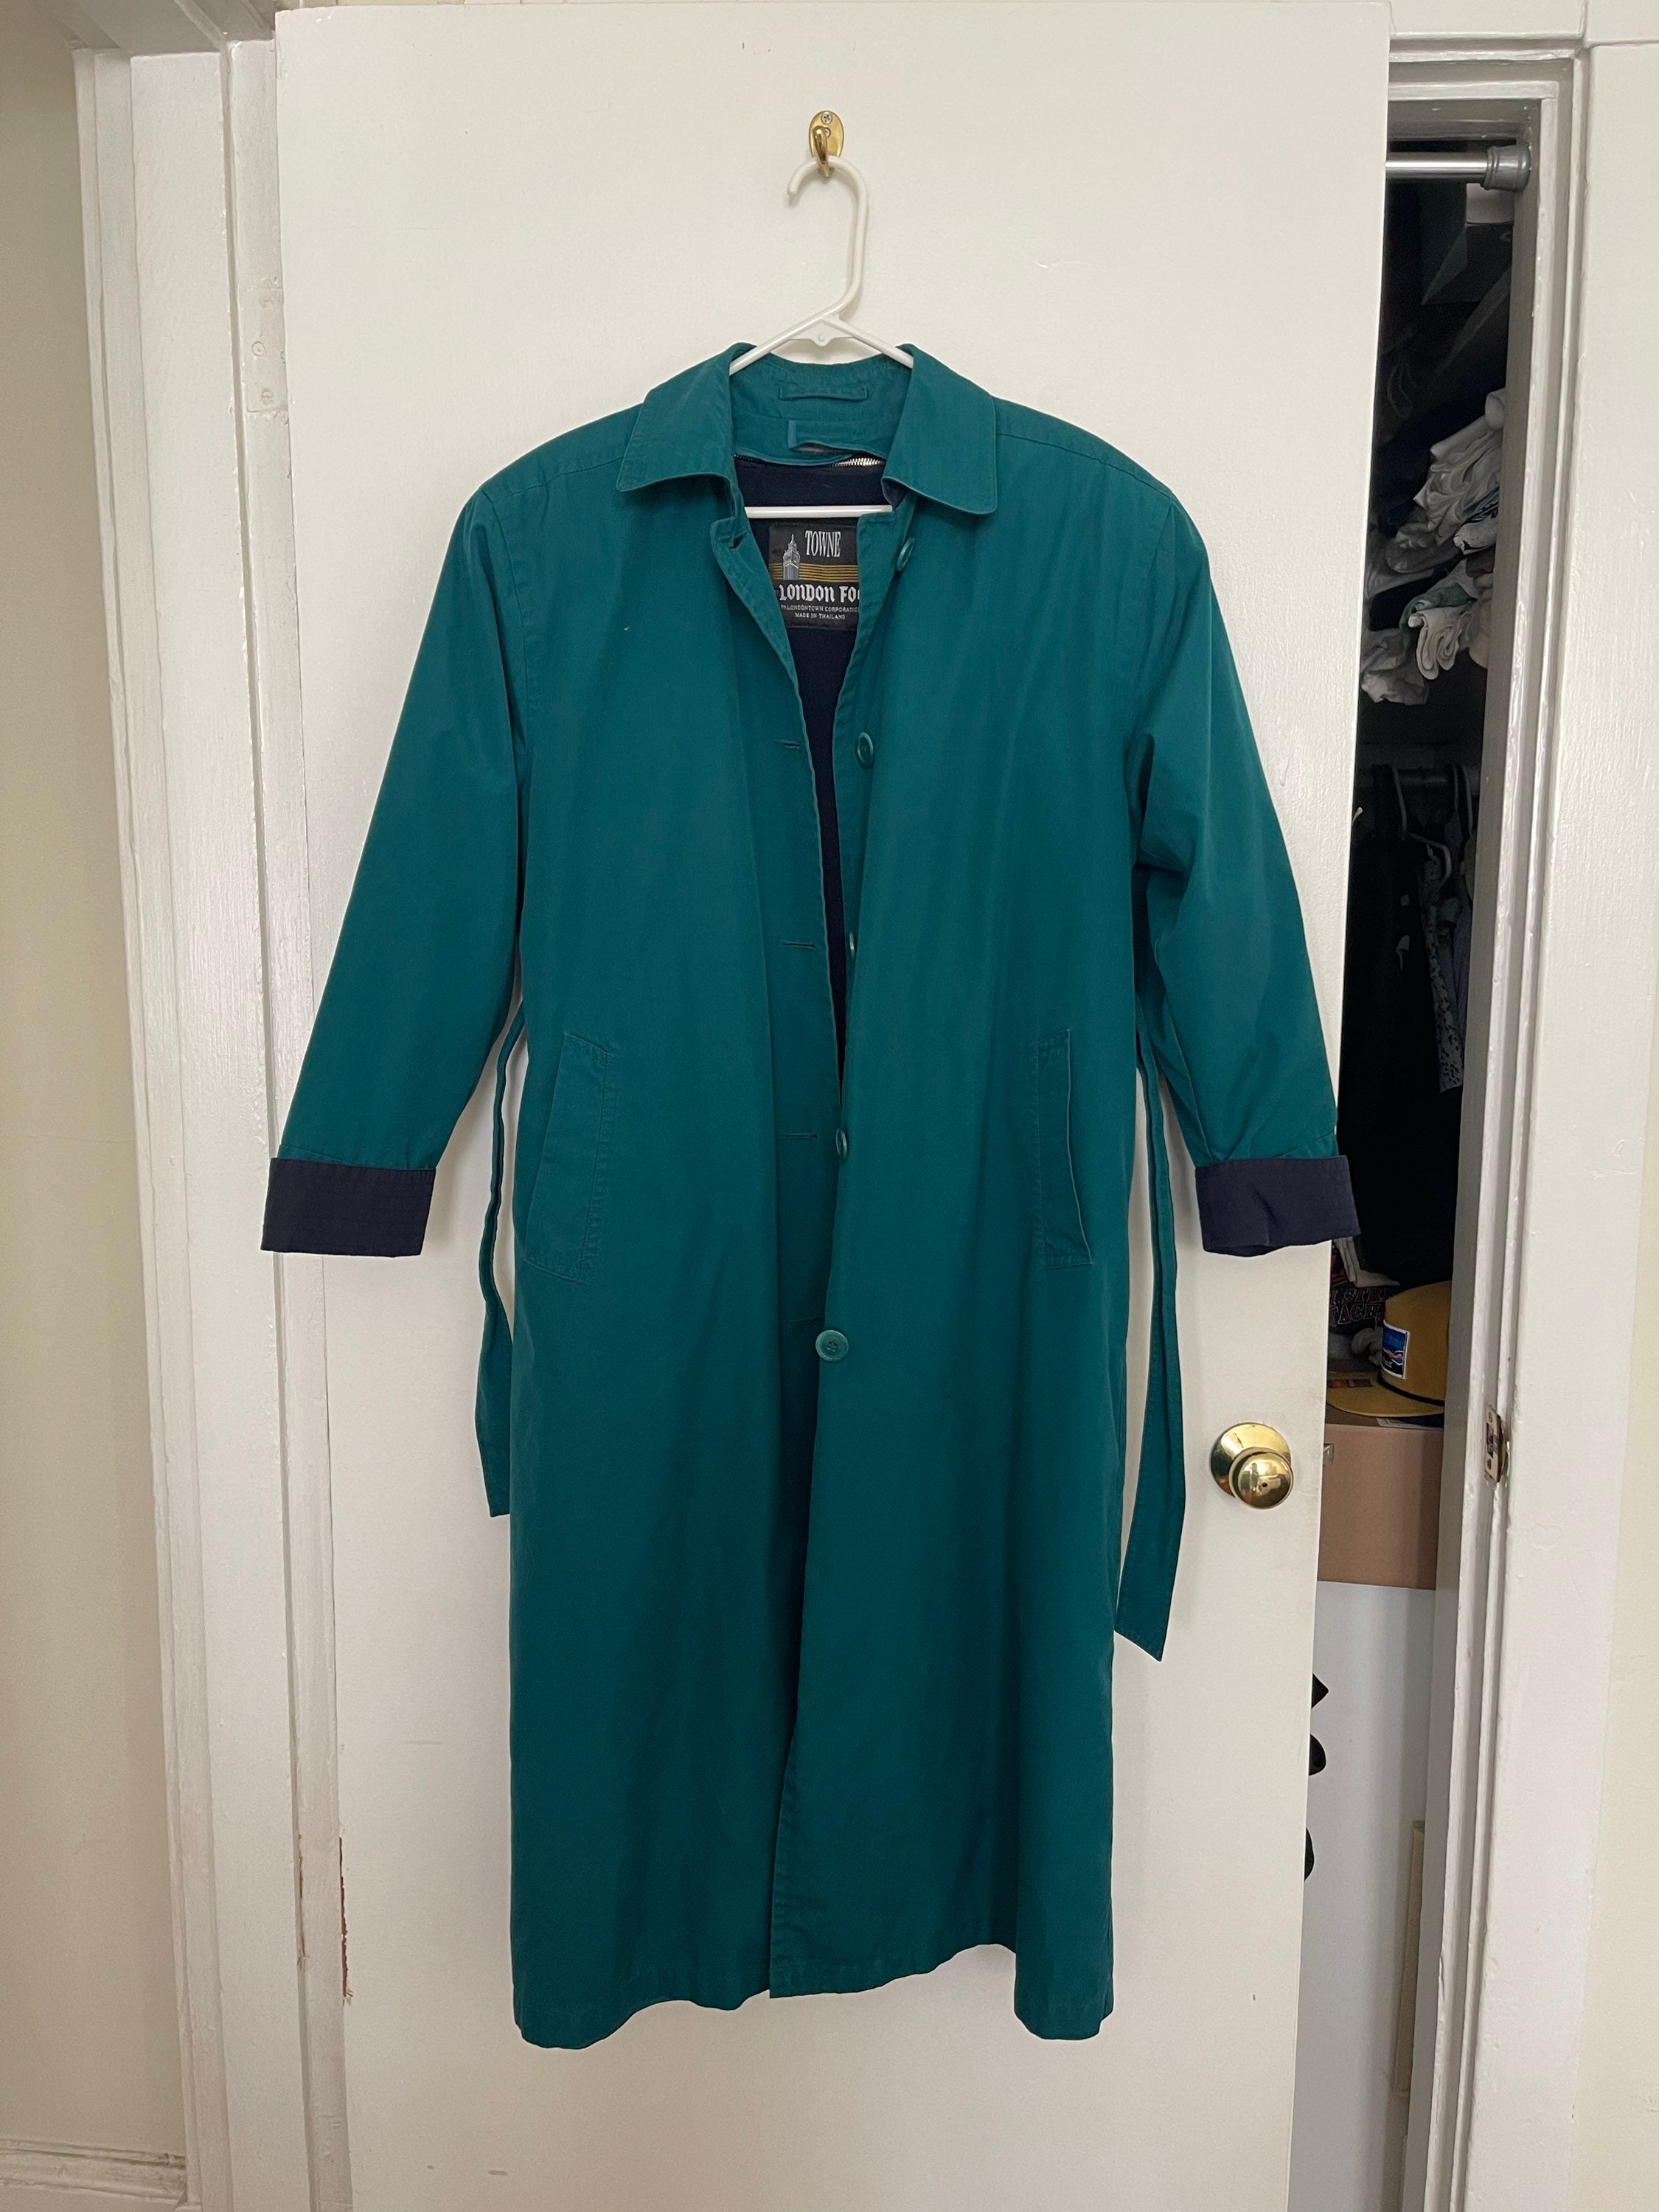 Vintage Green Trench, Green Trench, Long Green Jacket, Teal Jacket ...